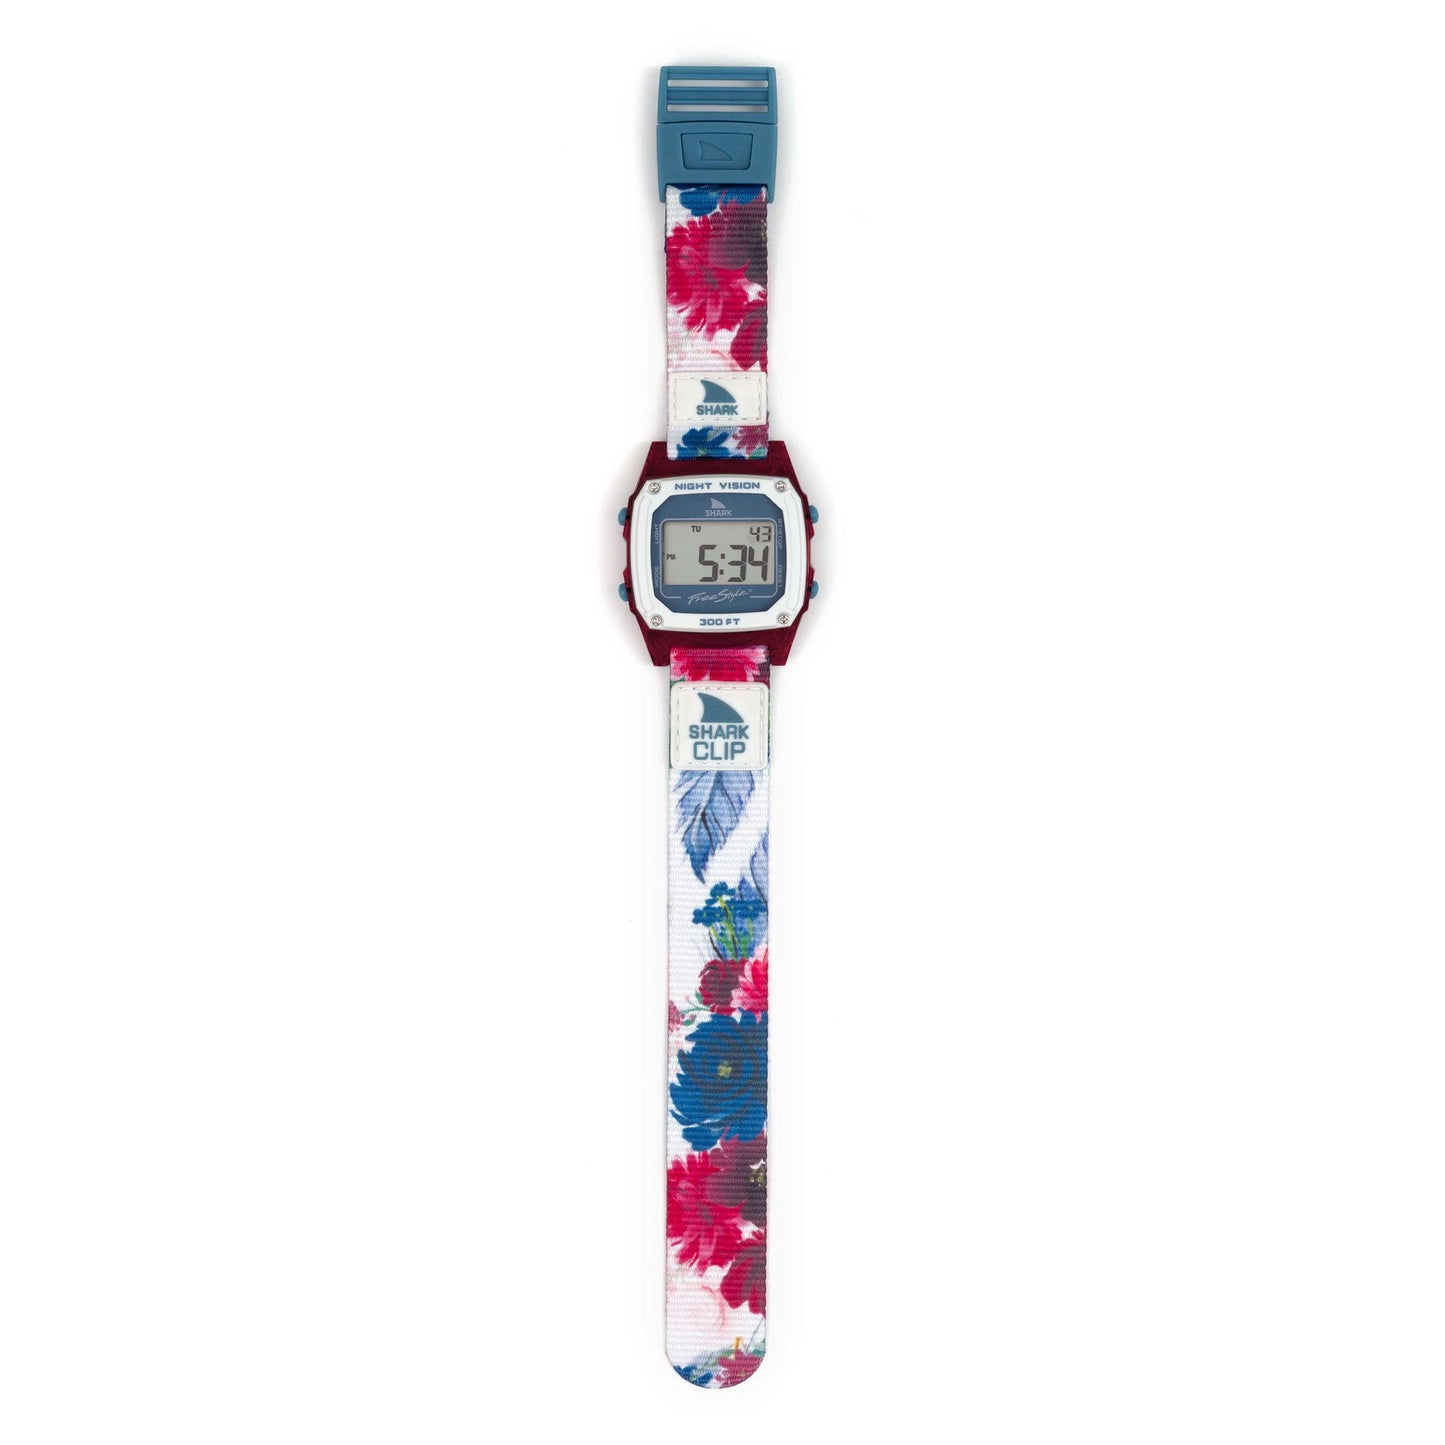 Freestyle Shark Classic Clip Watch - Dusty Rose